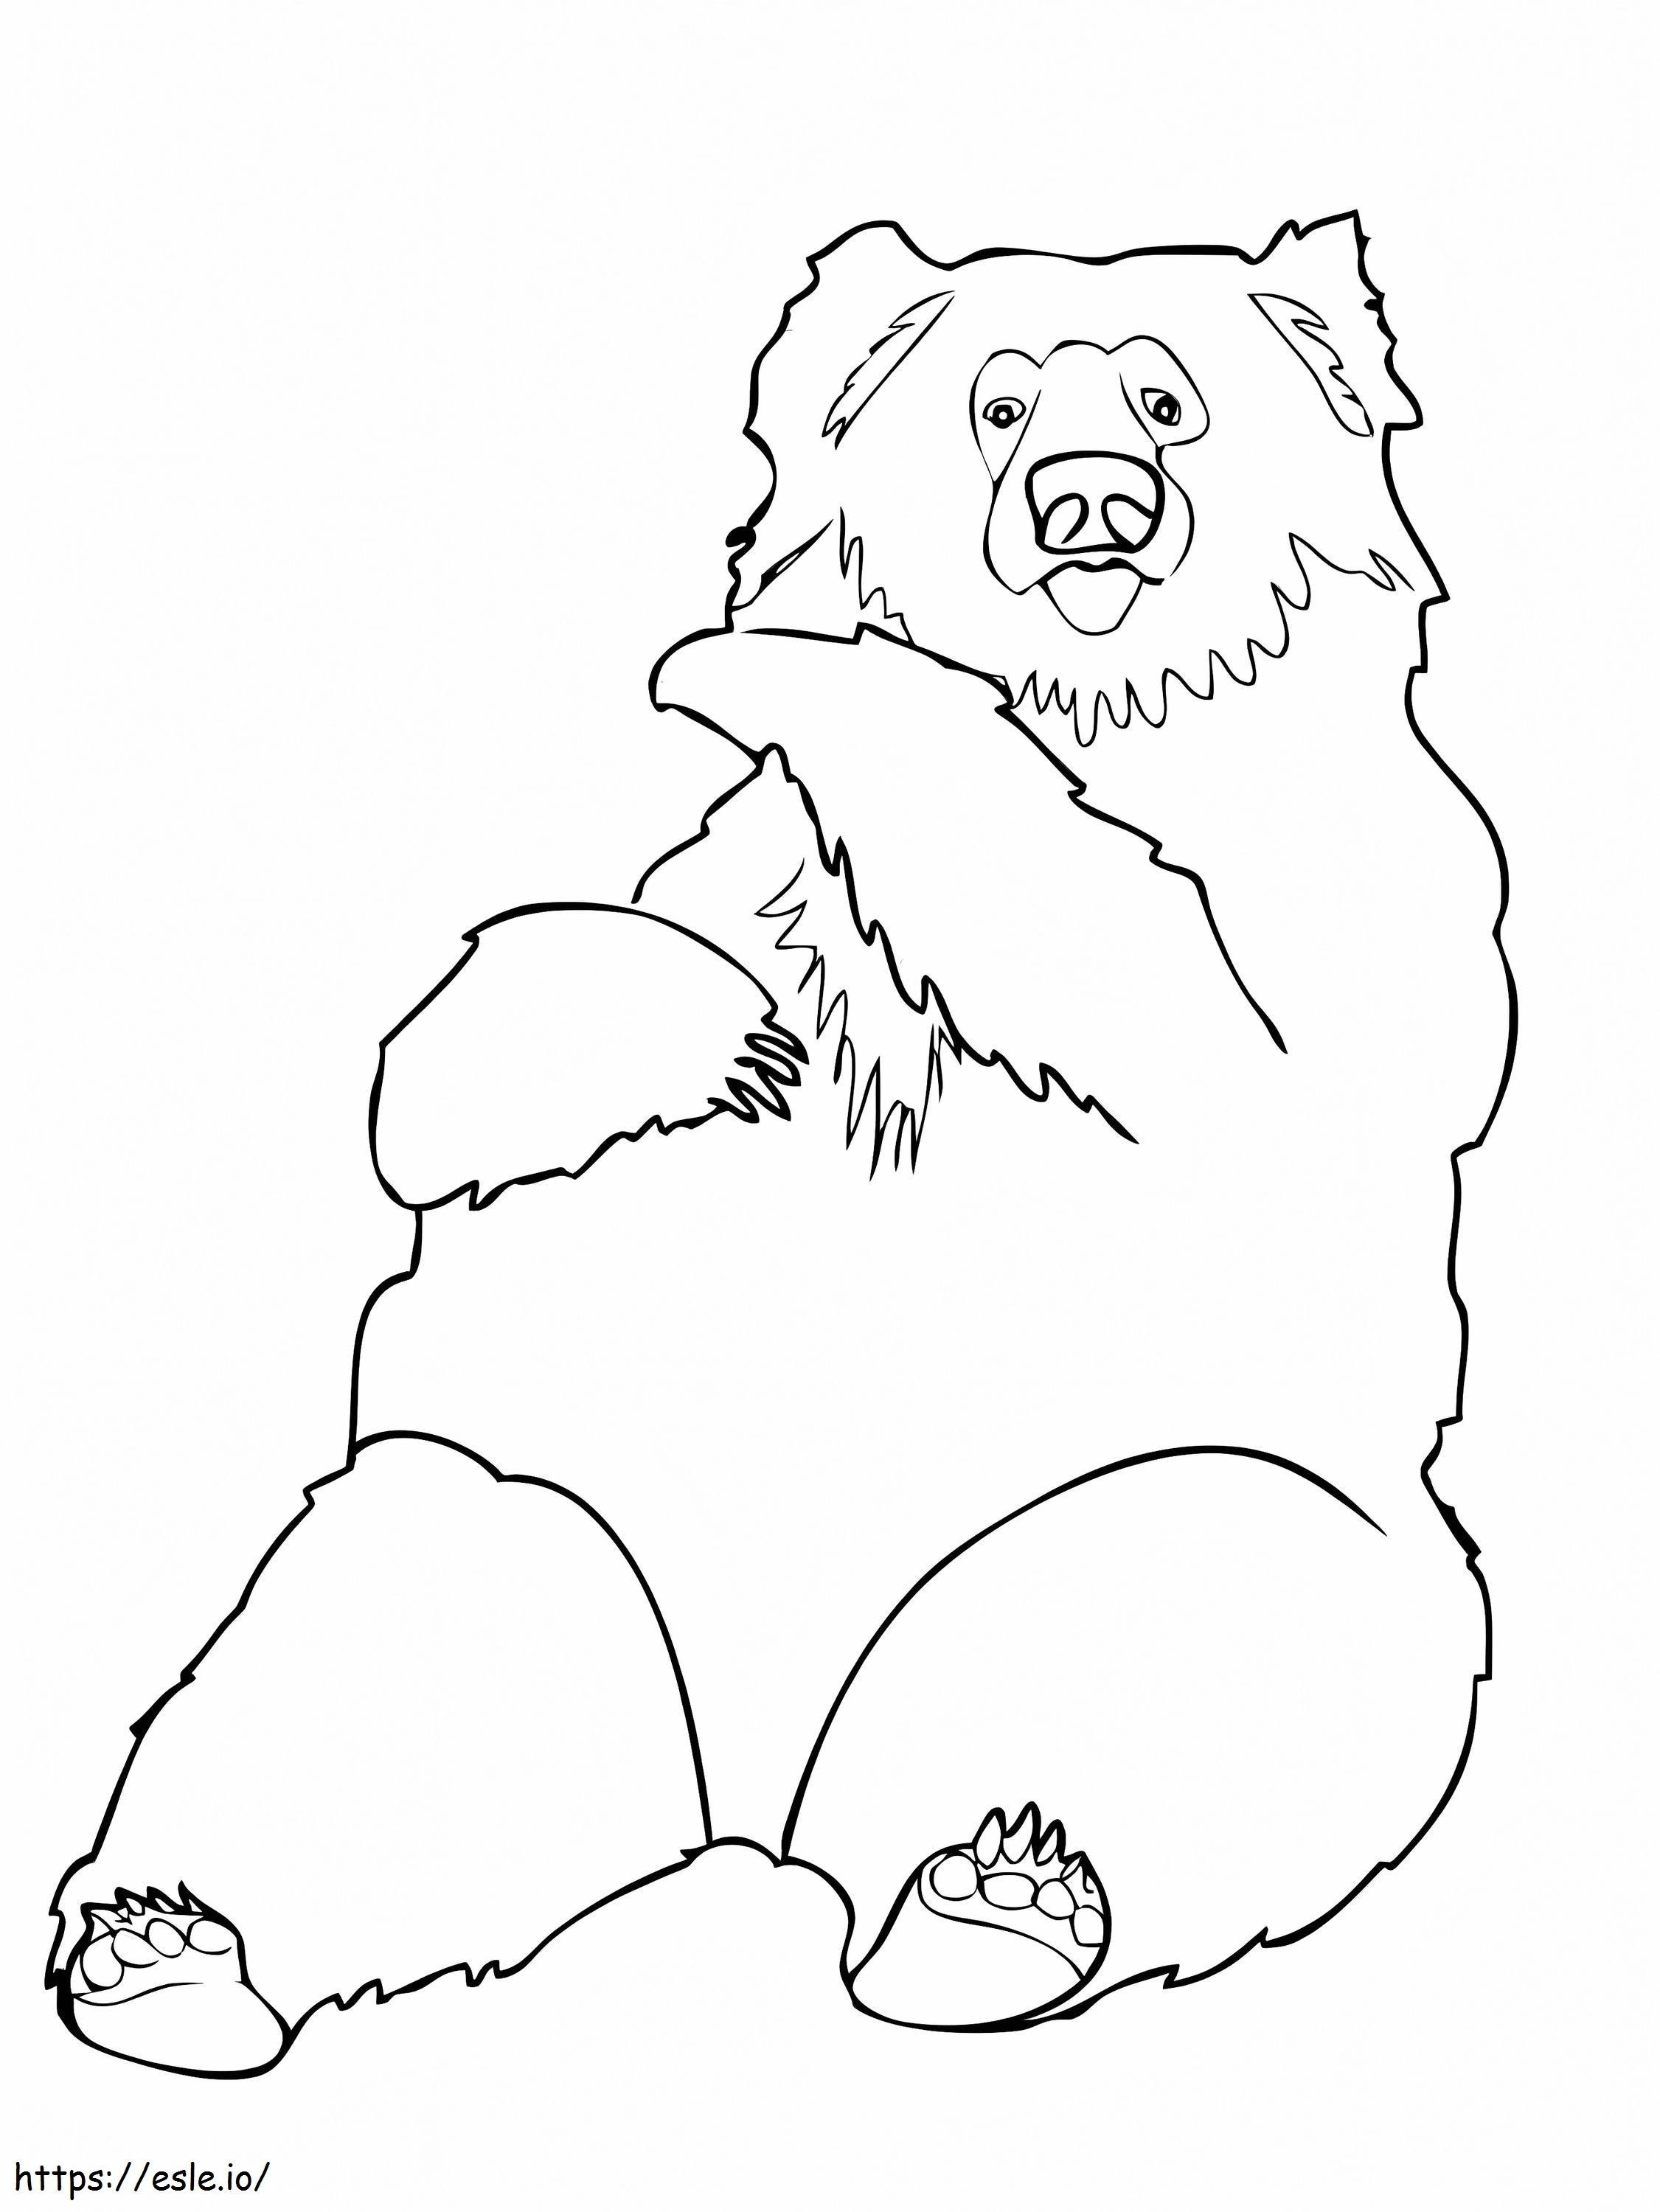 Lazy Bear Lying Down coloring page